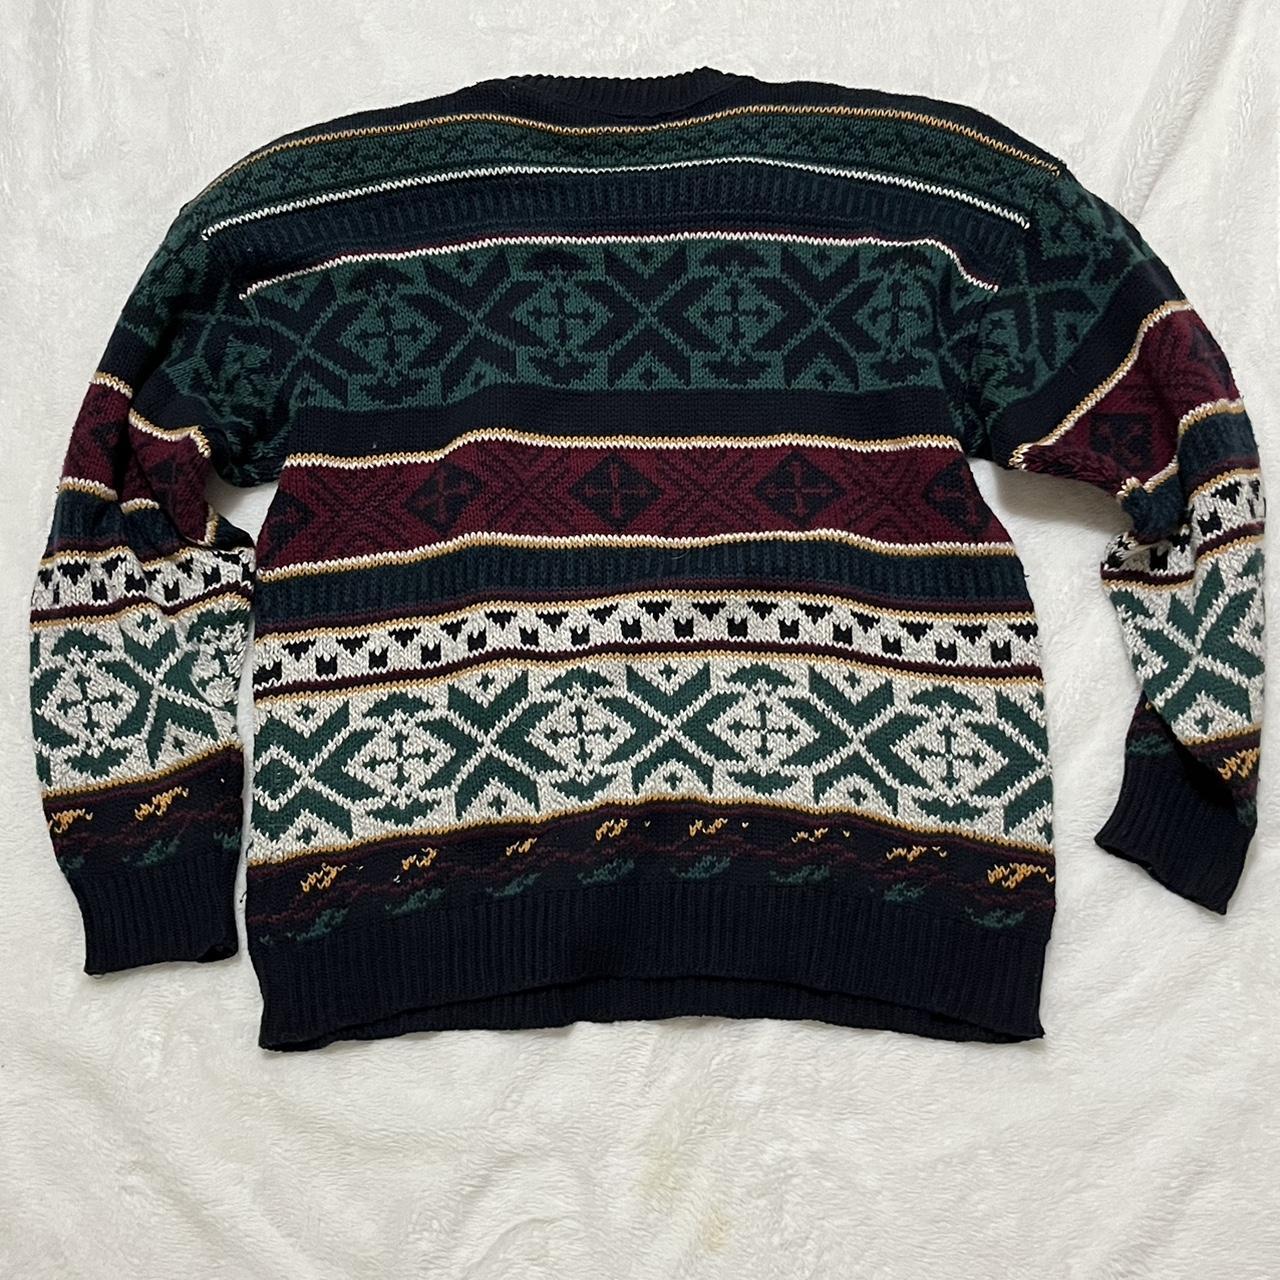 Vintage 90s Aesthetic Patterned Knitted Made in USA... - Depop